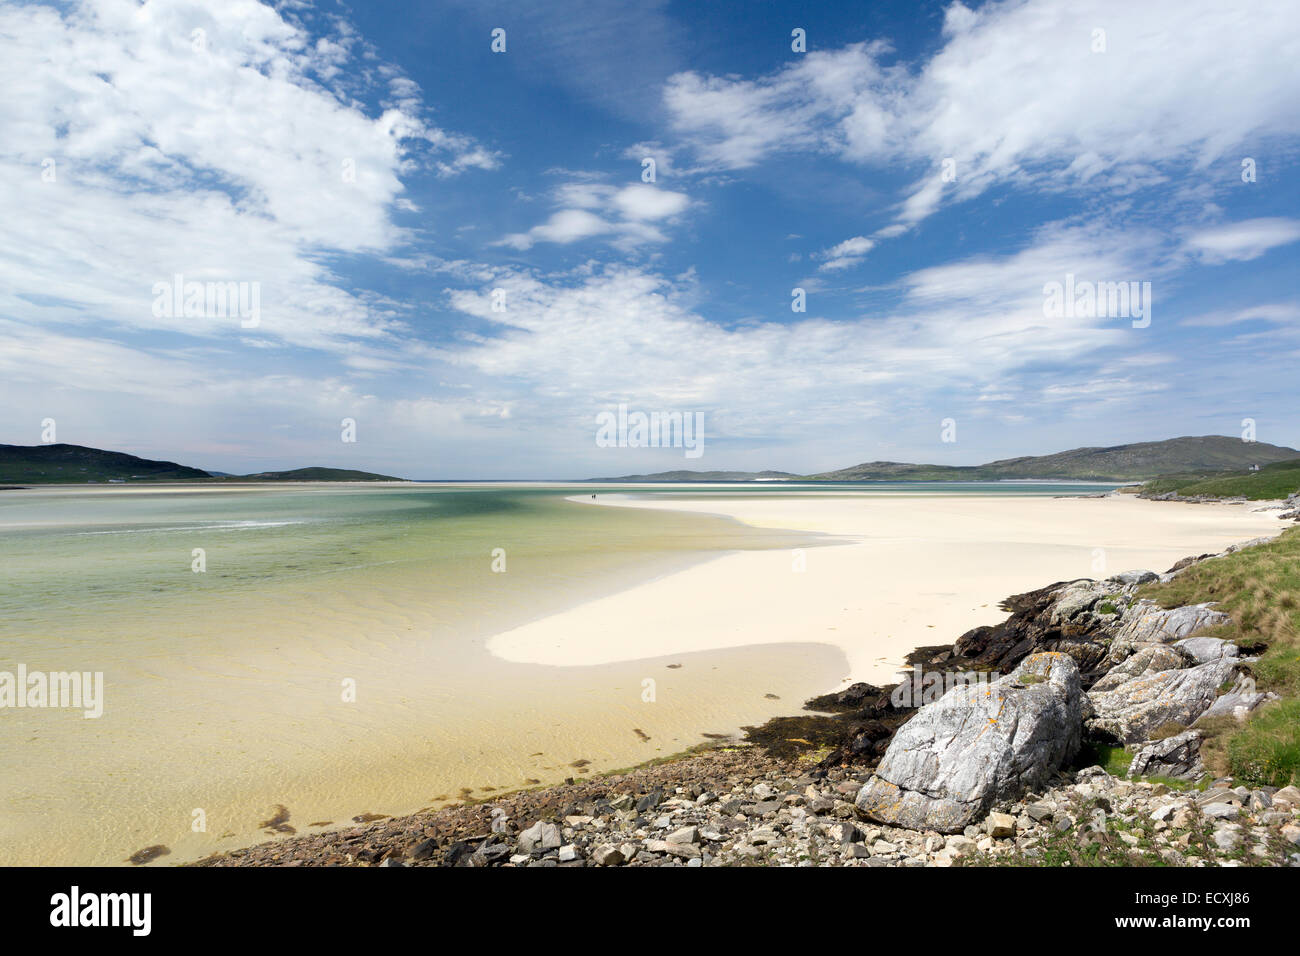 Green and turquoise colors at low tide on Luskentyre beach on the Isle of Harris, Outer Hebrides, Scotland Stock Photo